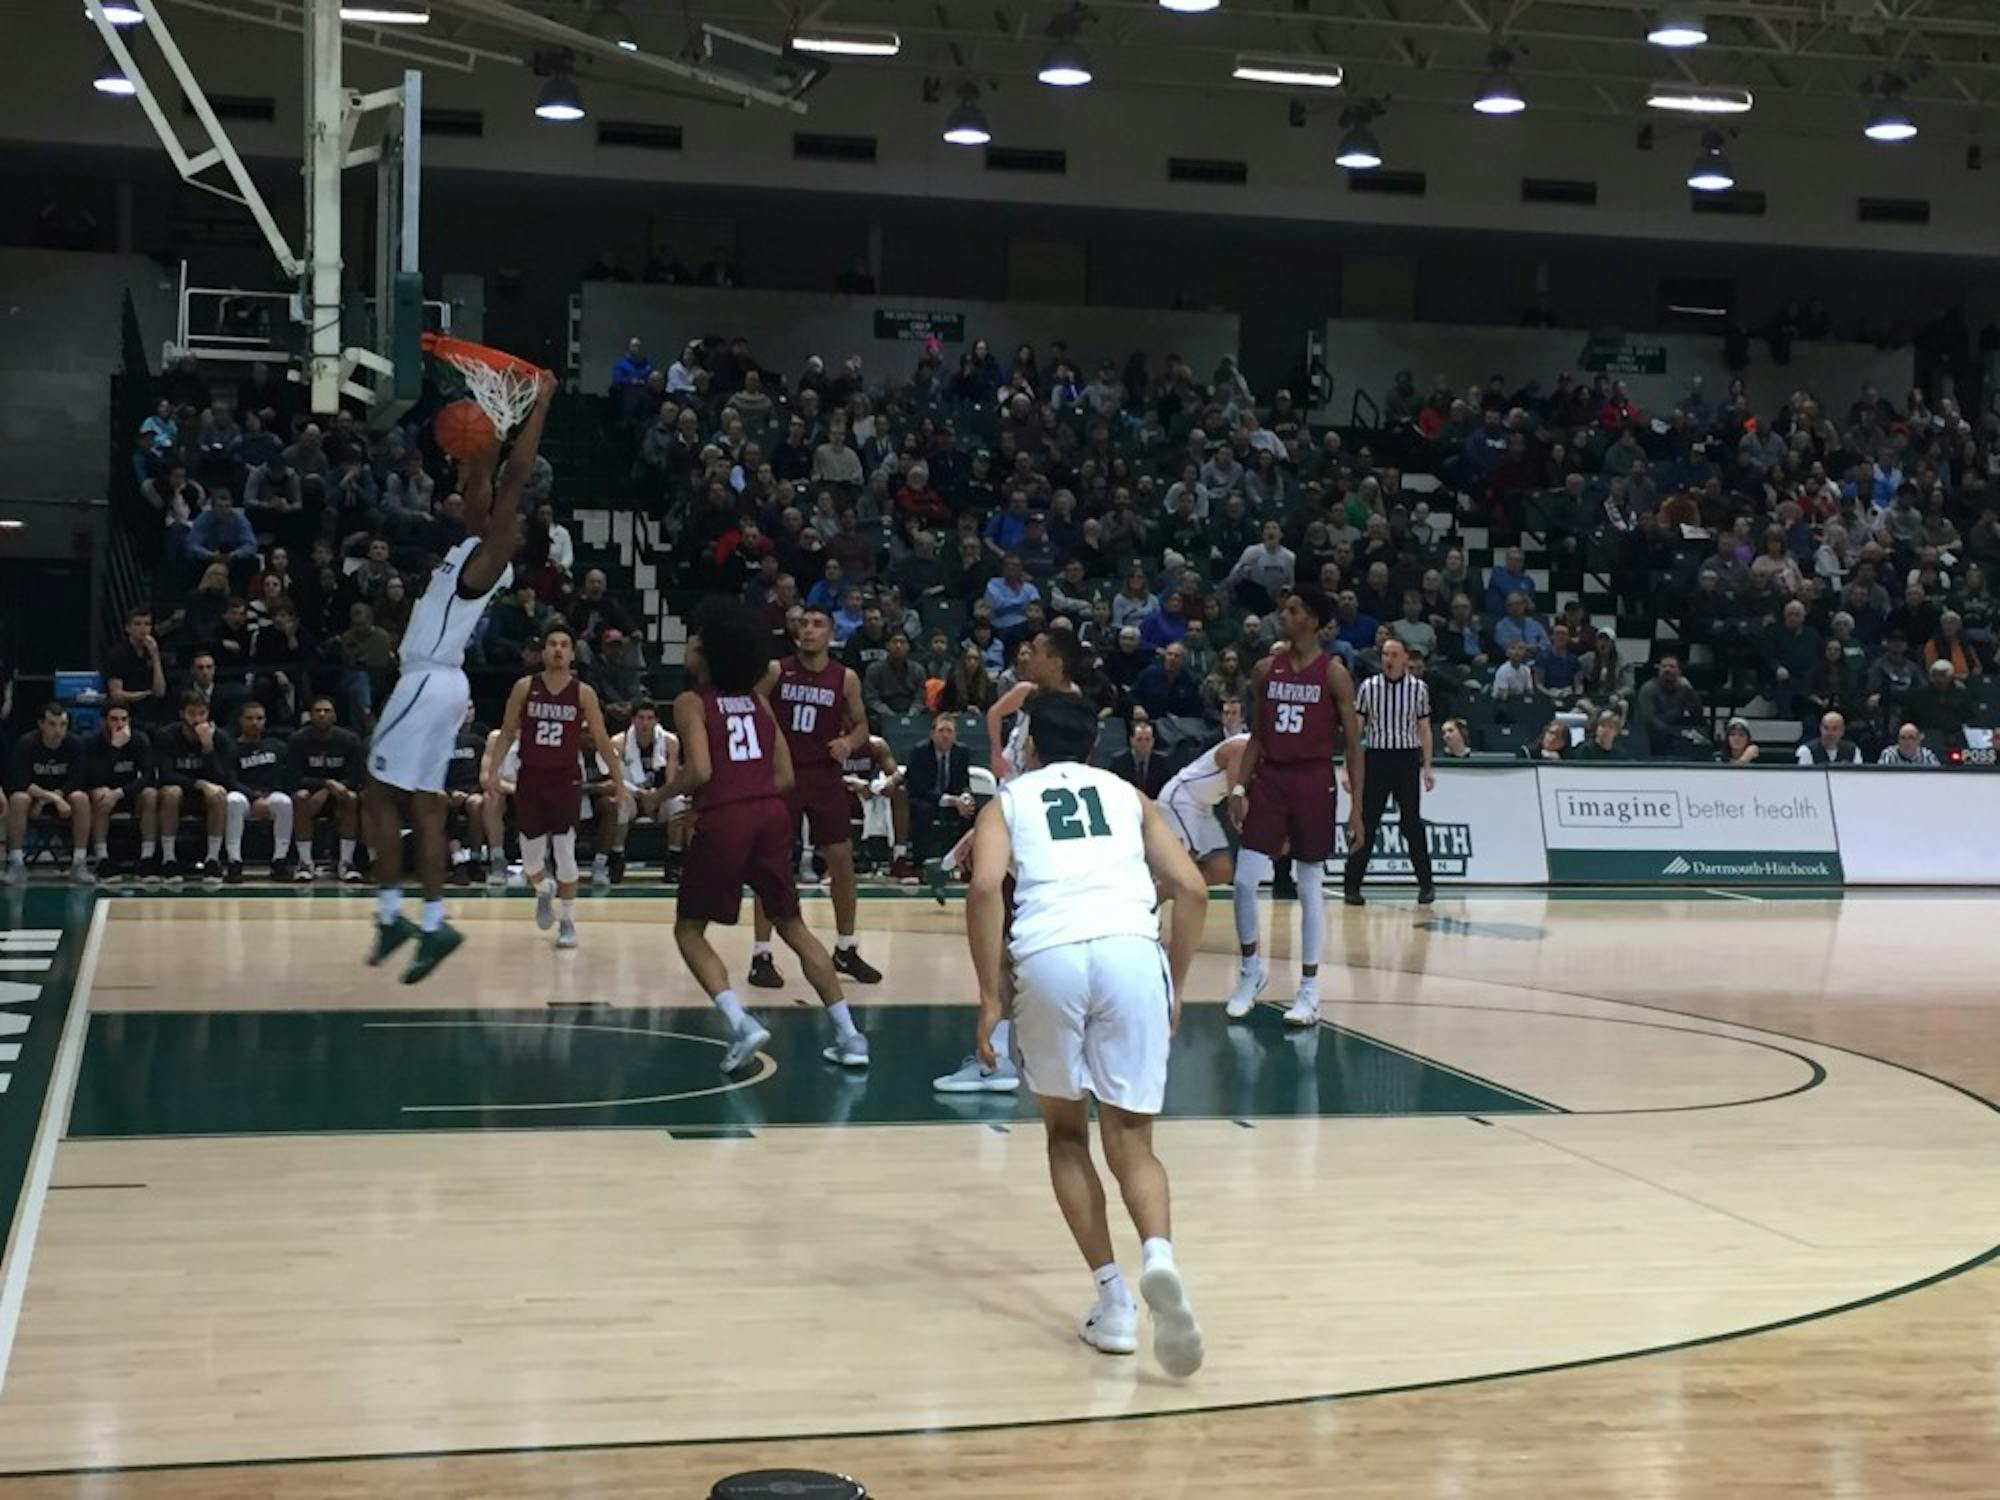 Chris Knight '21 dunked the ball during Dartmouth's 81-63 win over Harvard Saturday night. Knight scored 20 points in the game.